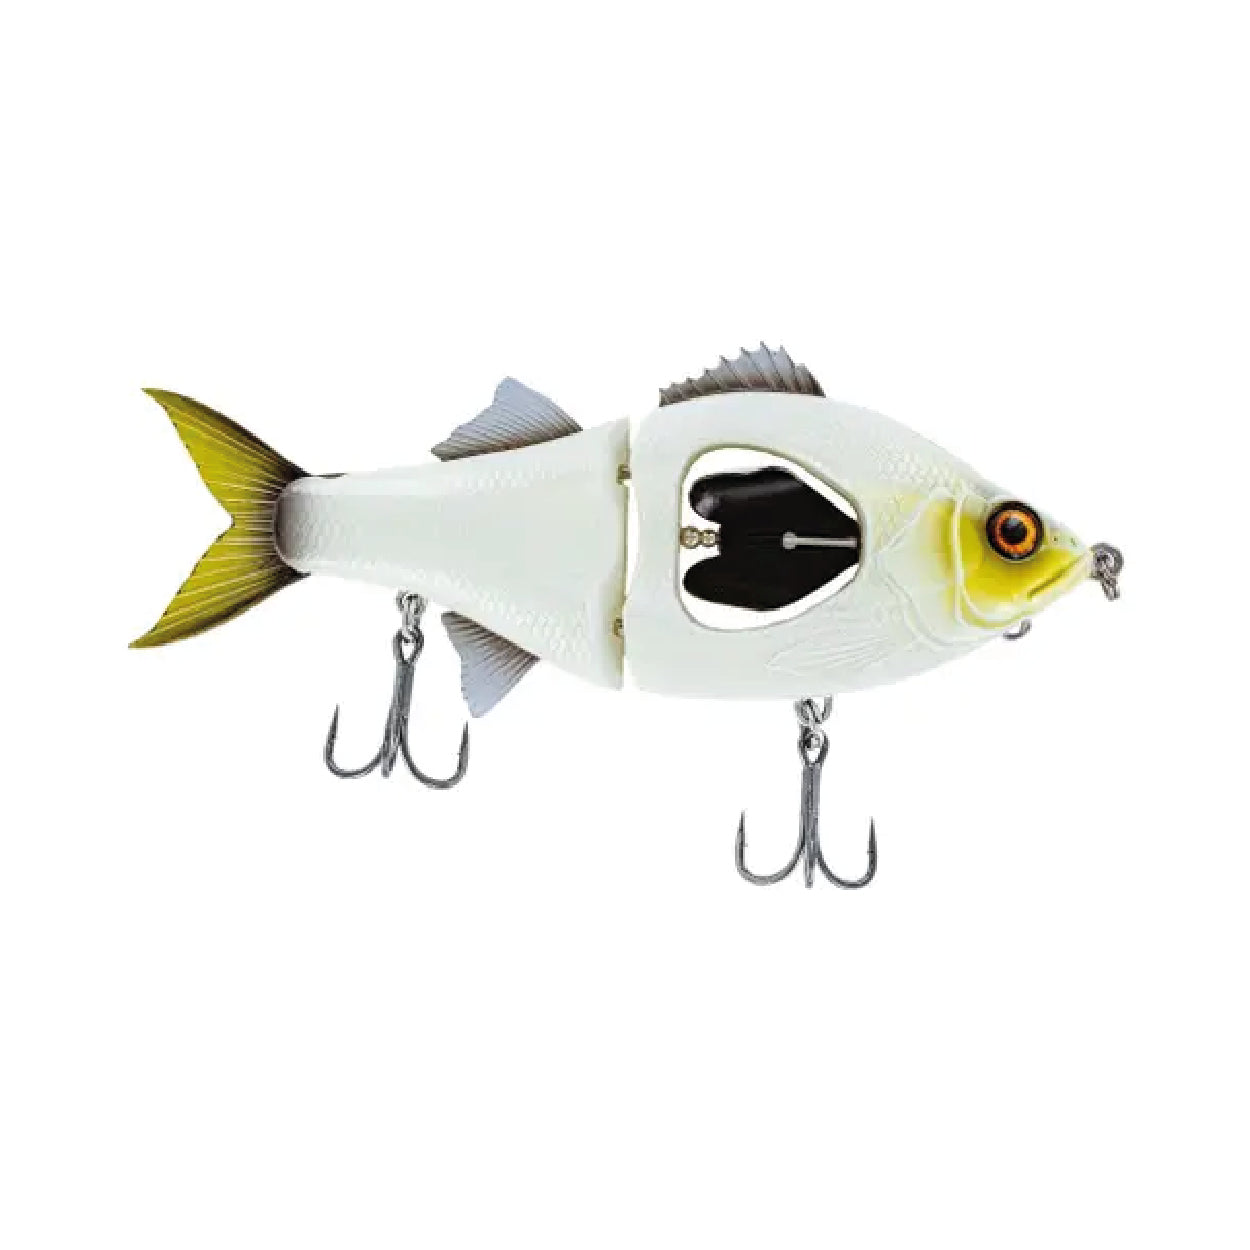 SEÑUELO CHASEBAITS PROP DUSTER GLIDER 5.1"